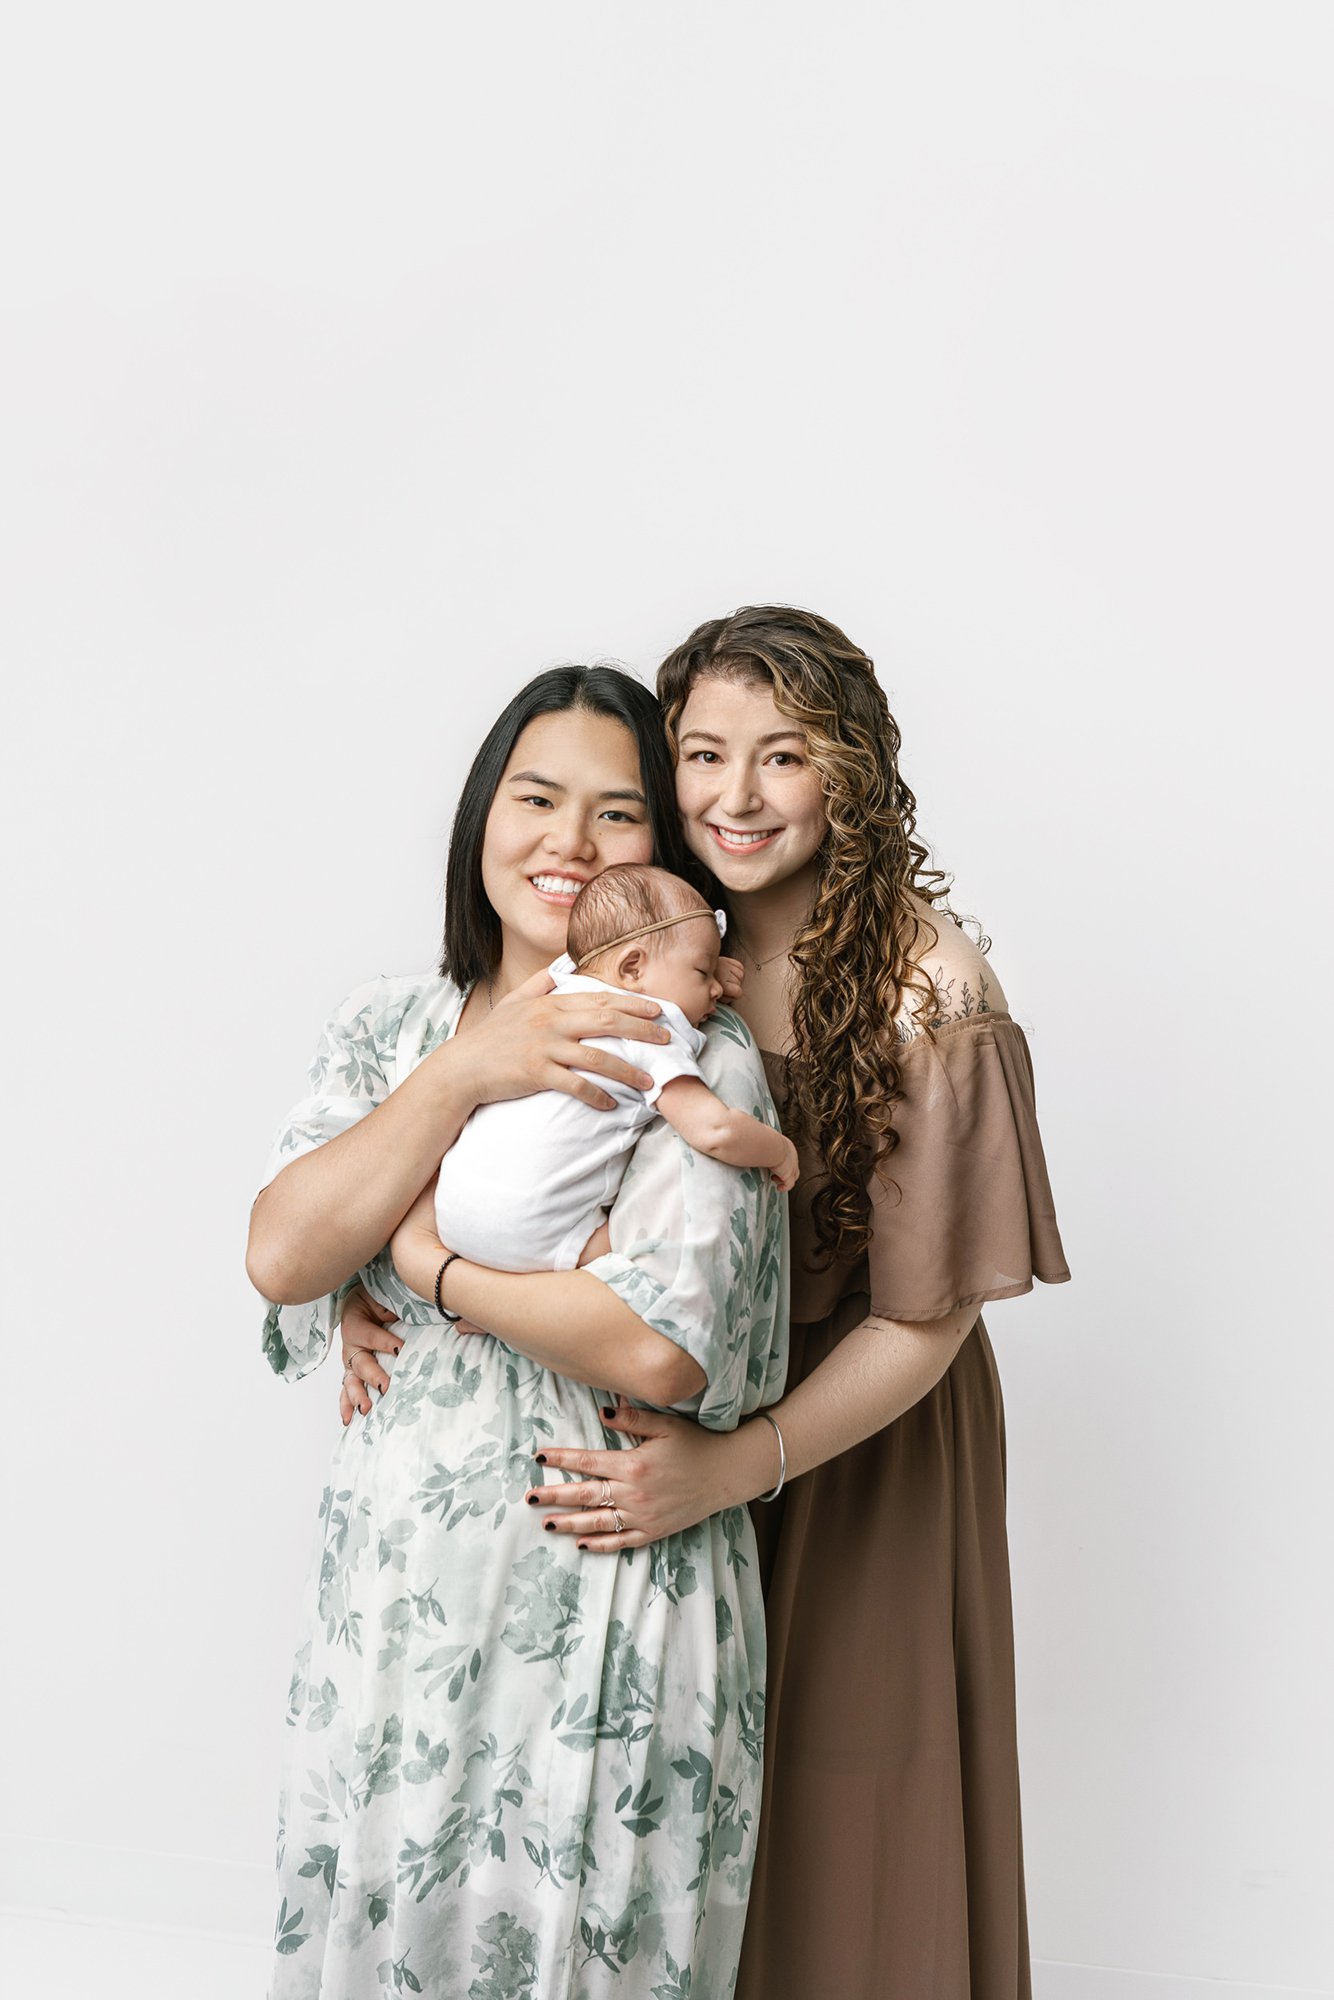   Formal family portrait of two mothers with a newborn baby girl during in-studio family photoshoot, taken by Nicole Hawkins, New Jersey family photographer. #UnionCountyFamilyPhotographer #MorrisCountyFamilyPhotographer #NorthernNewJerseyFamilyPhoto